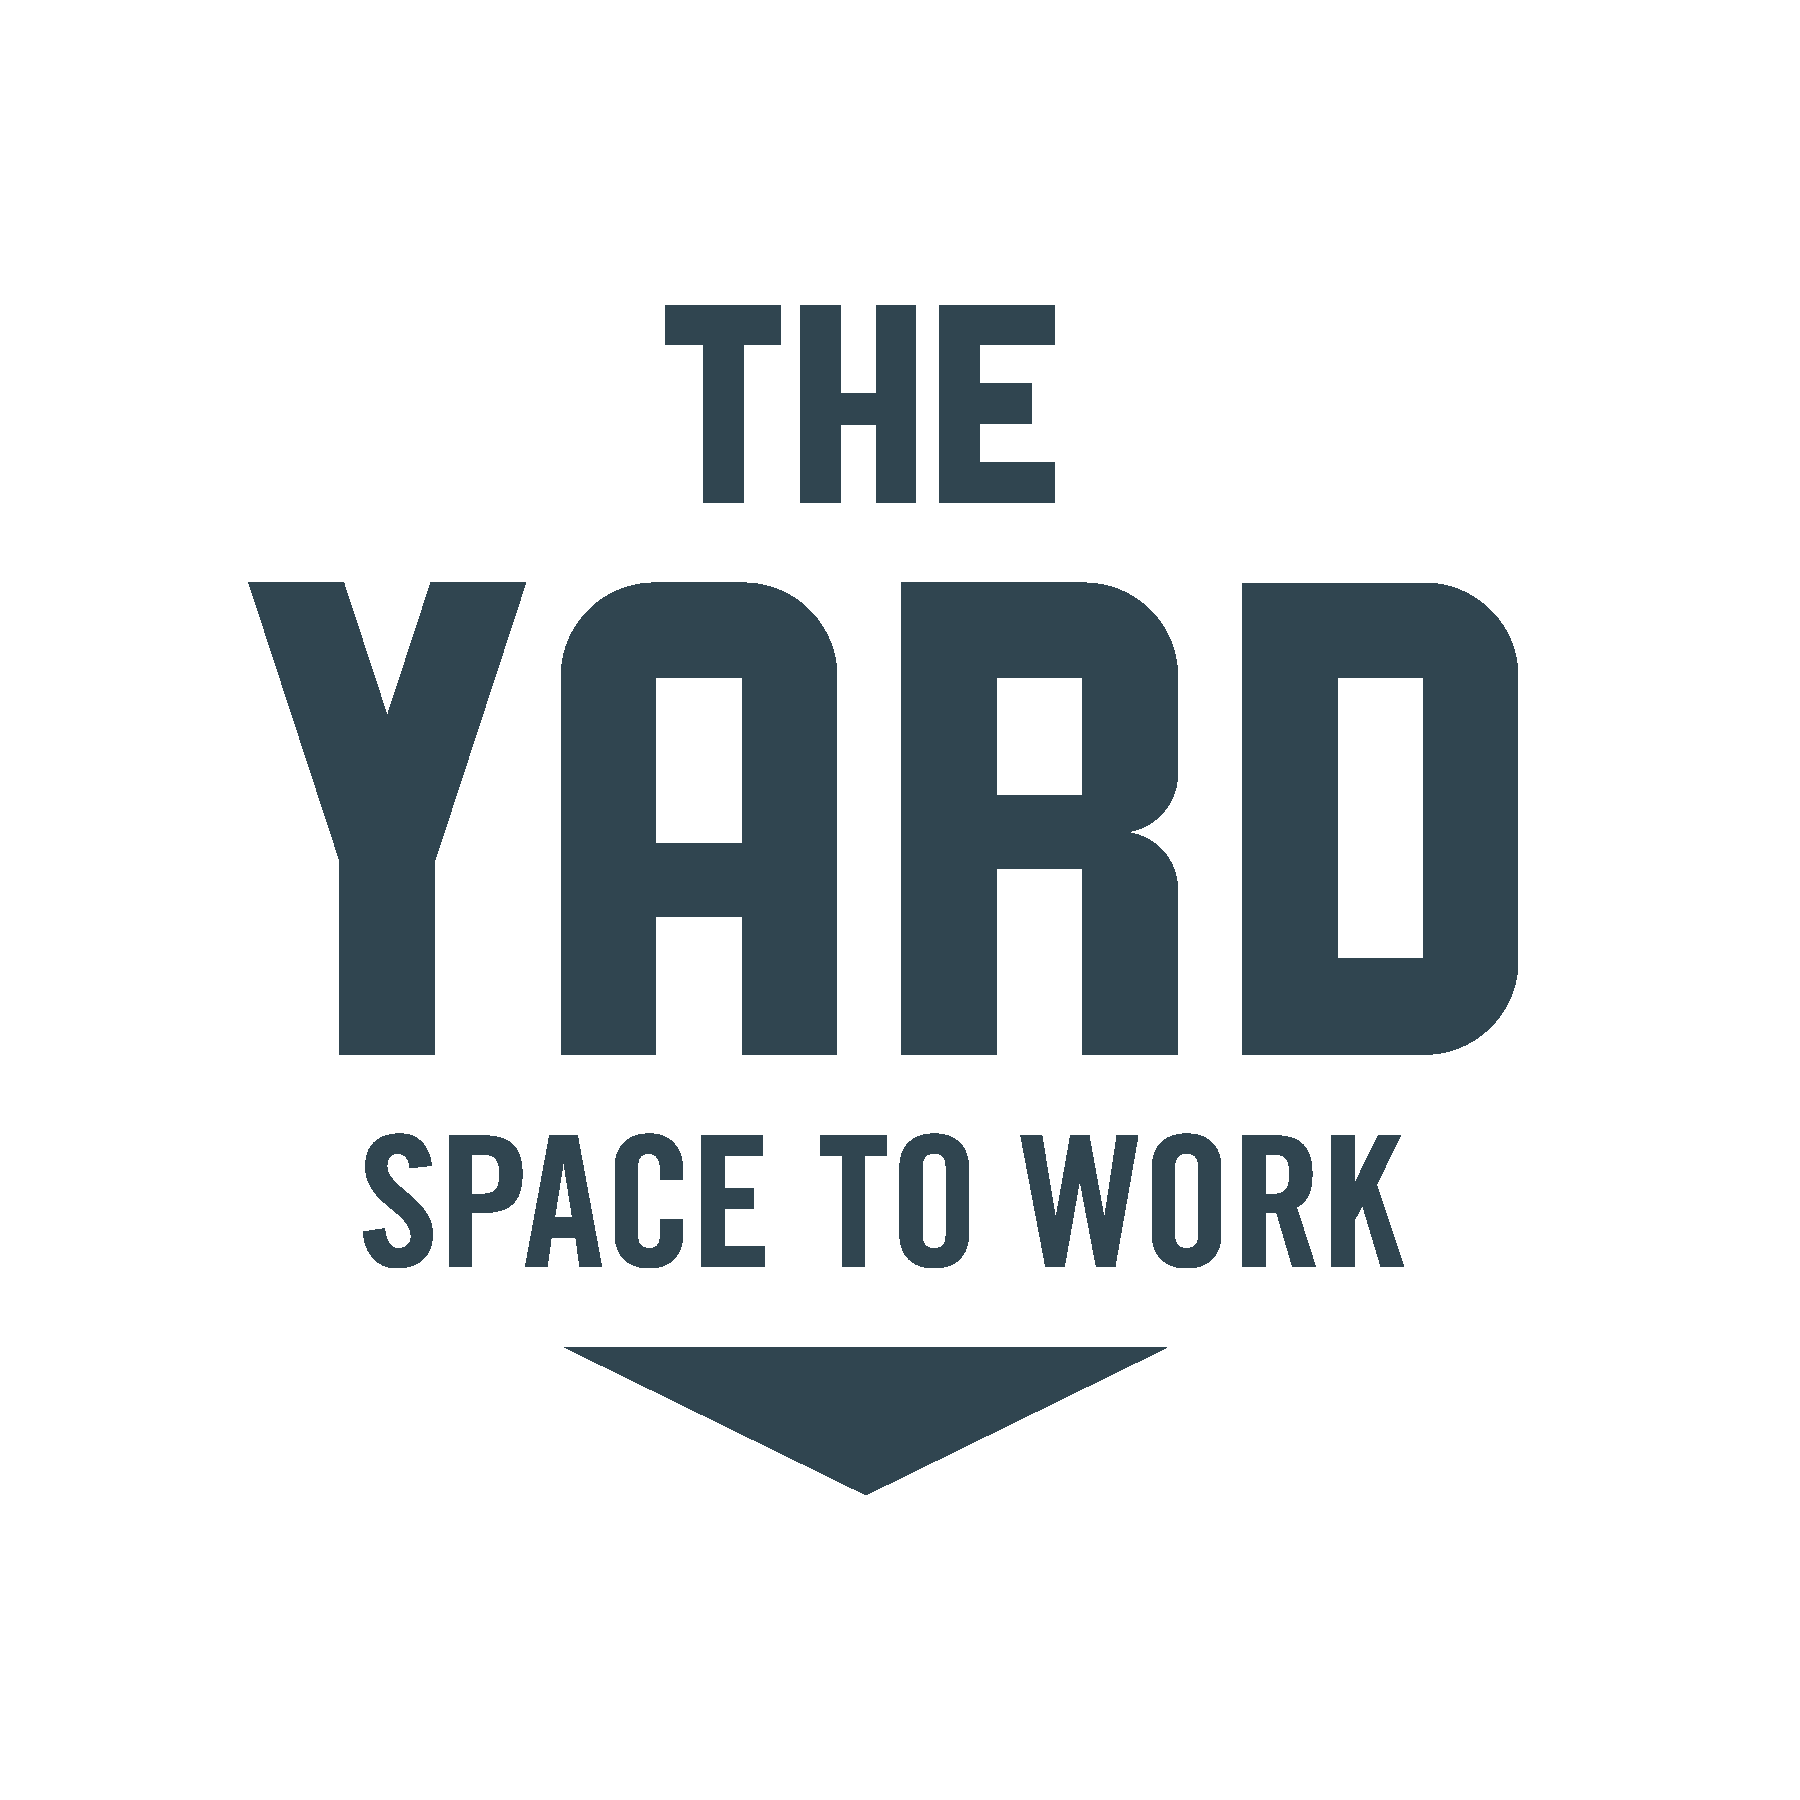 Yard Logo - NYC Coworking Space - Day Pass $35, Work Space, Office Space :The Yard